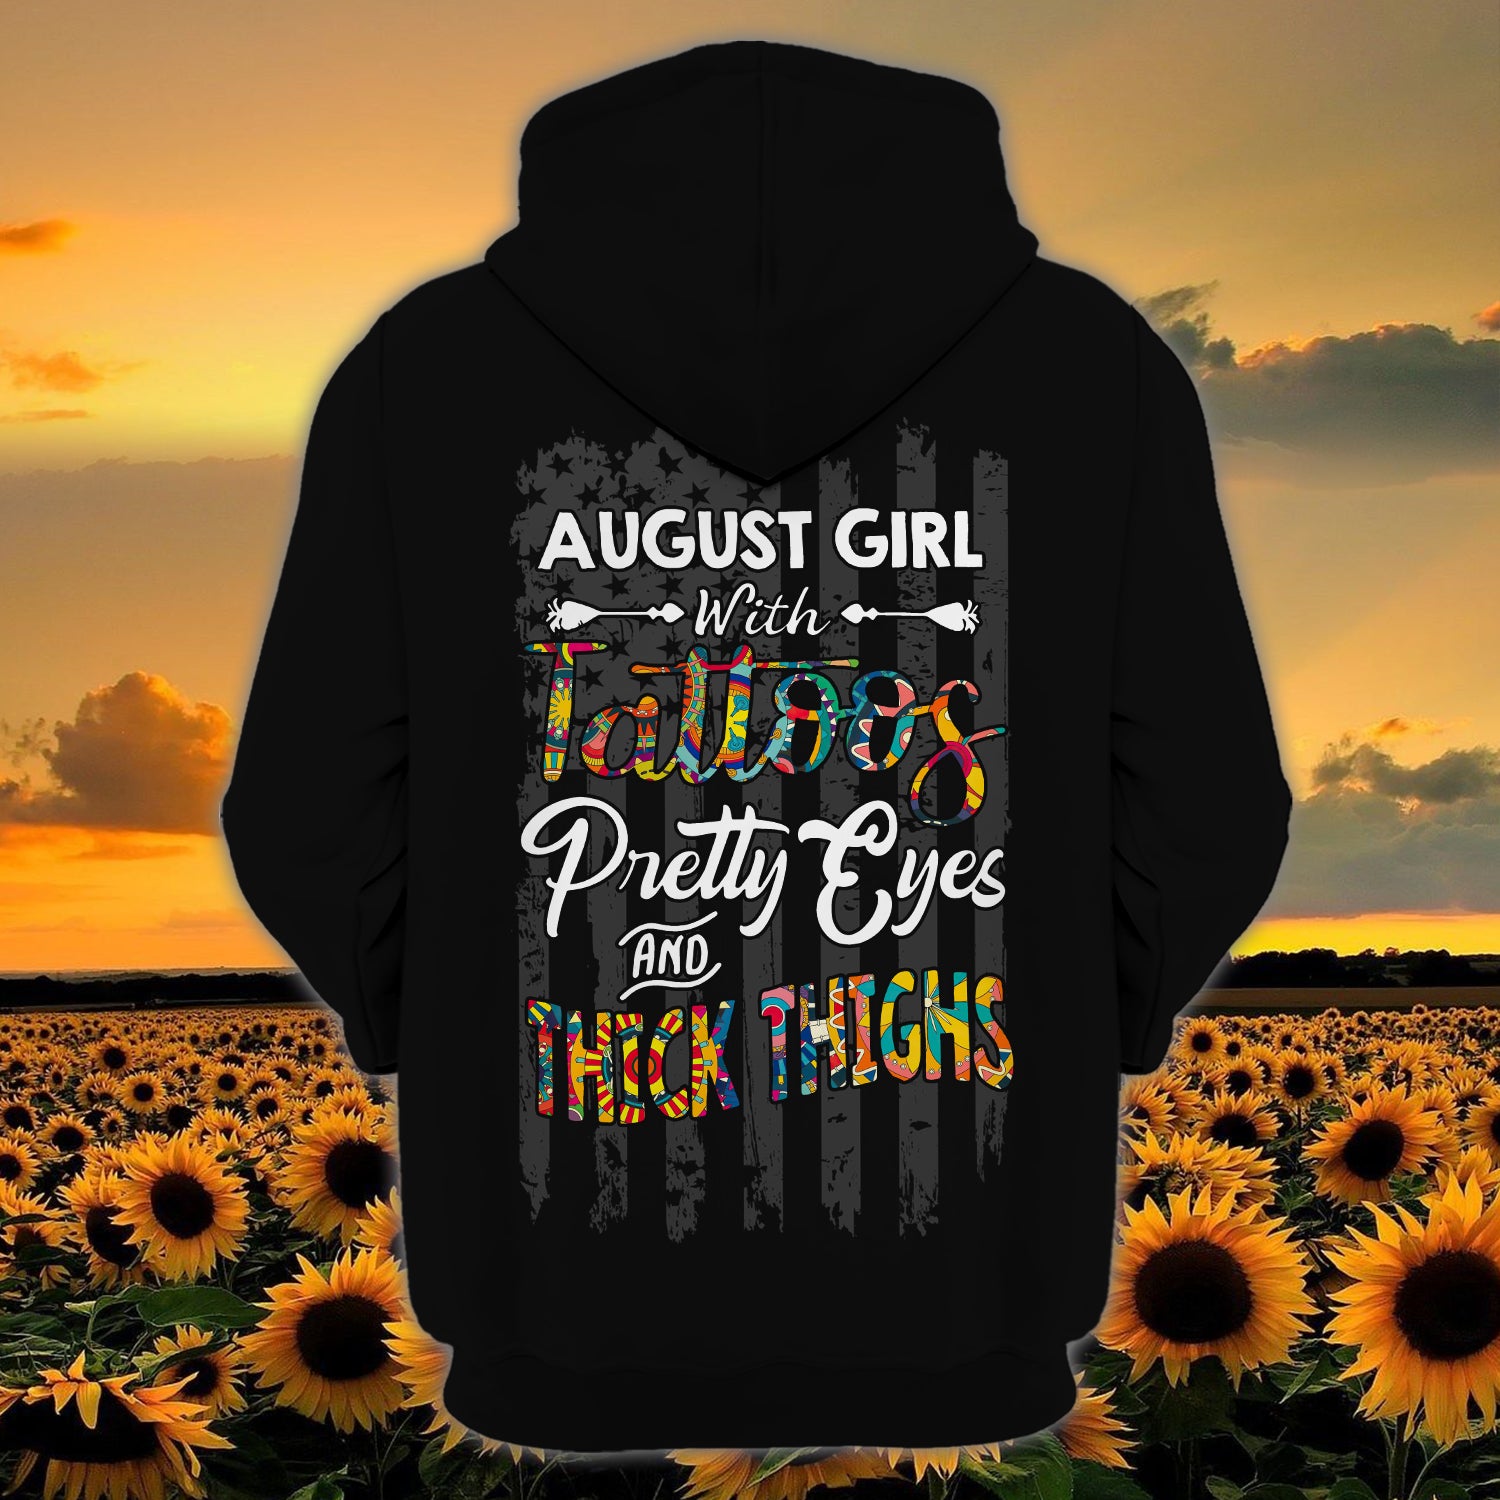 August Girls with Tattoos Pretty Eyes and Thick Thighs - Personalized Name 3D Hoodie